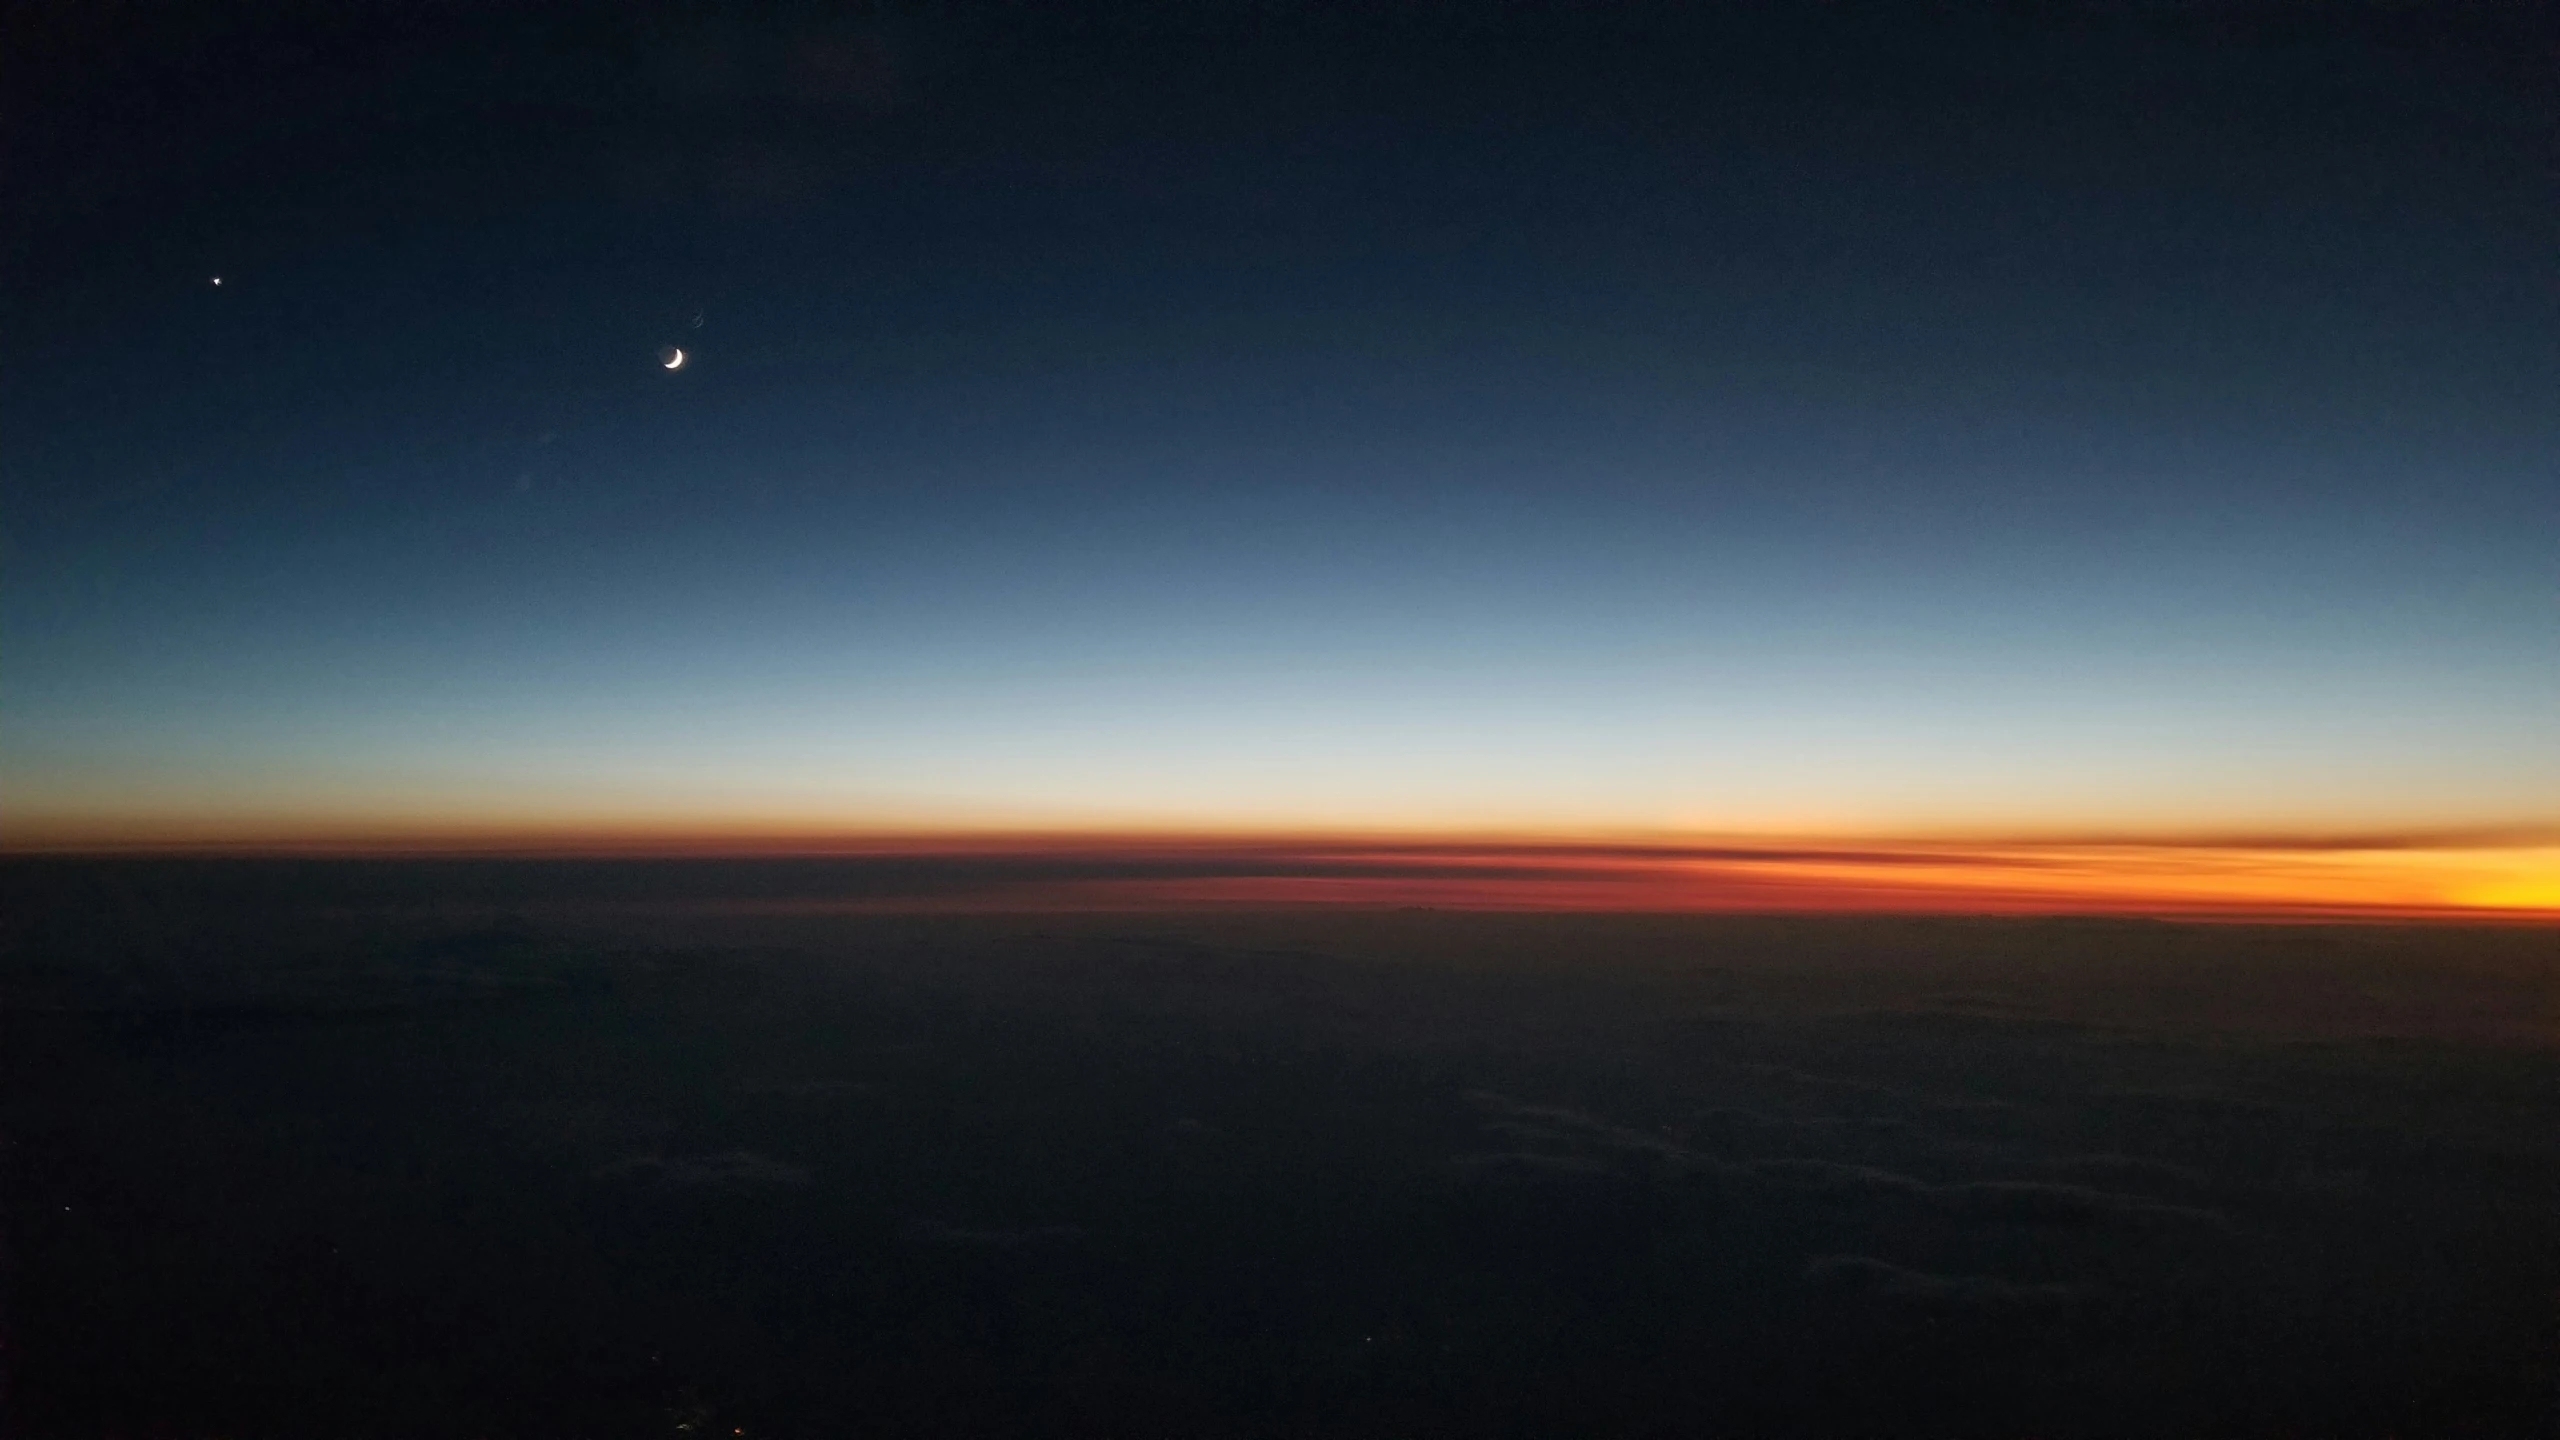 the sunset and the moon are seen over an airplane wing